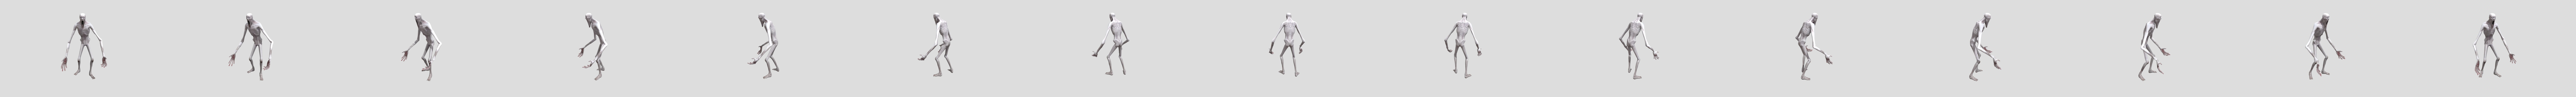 SCP-096 - Download Free 3D model by Maxime66410 (@Maxime66410